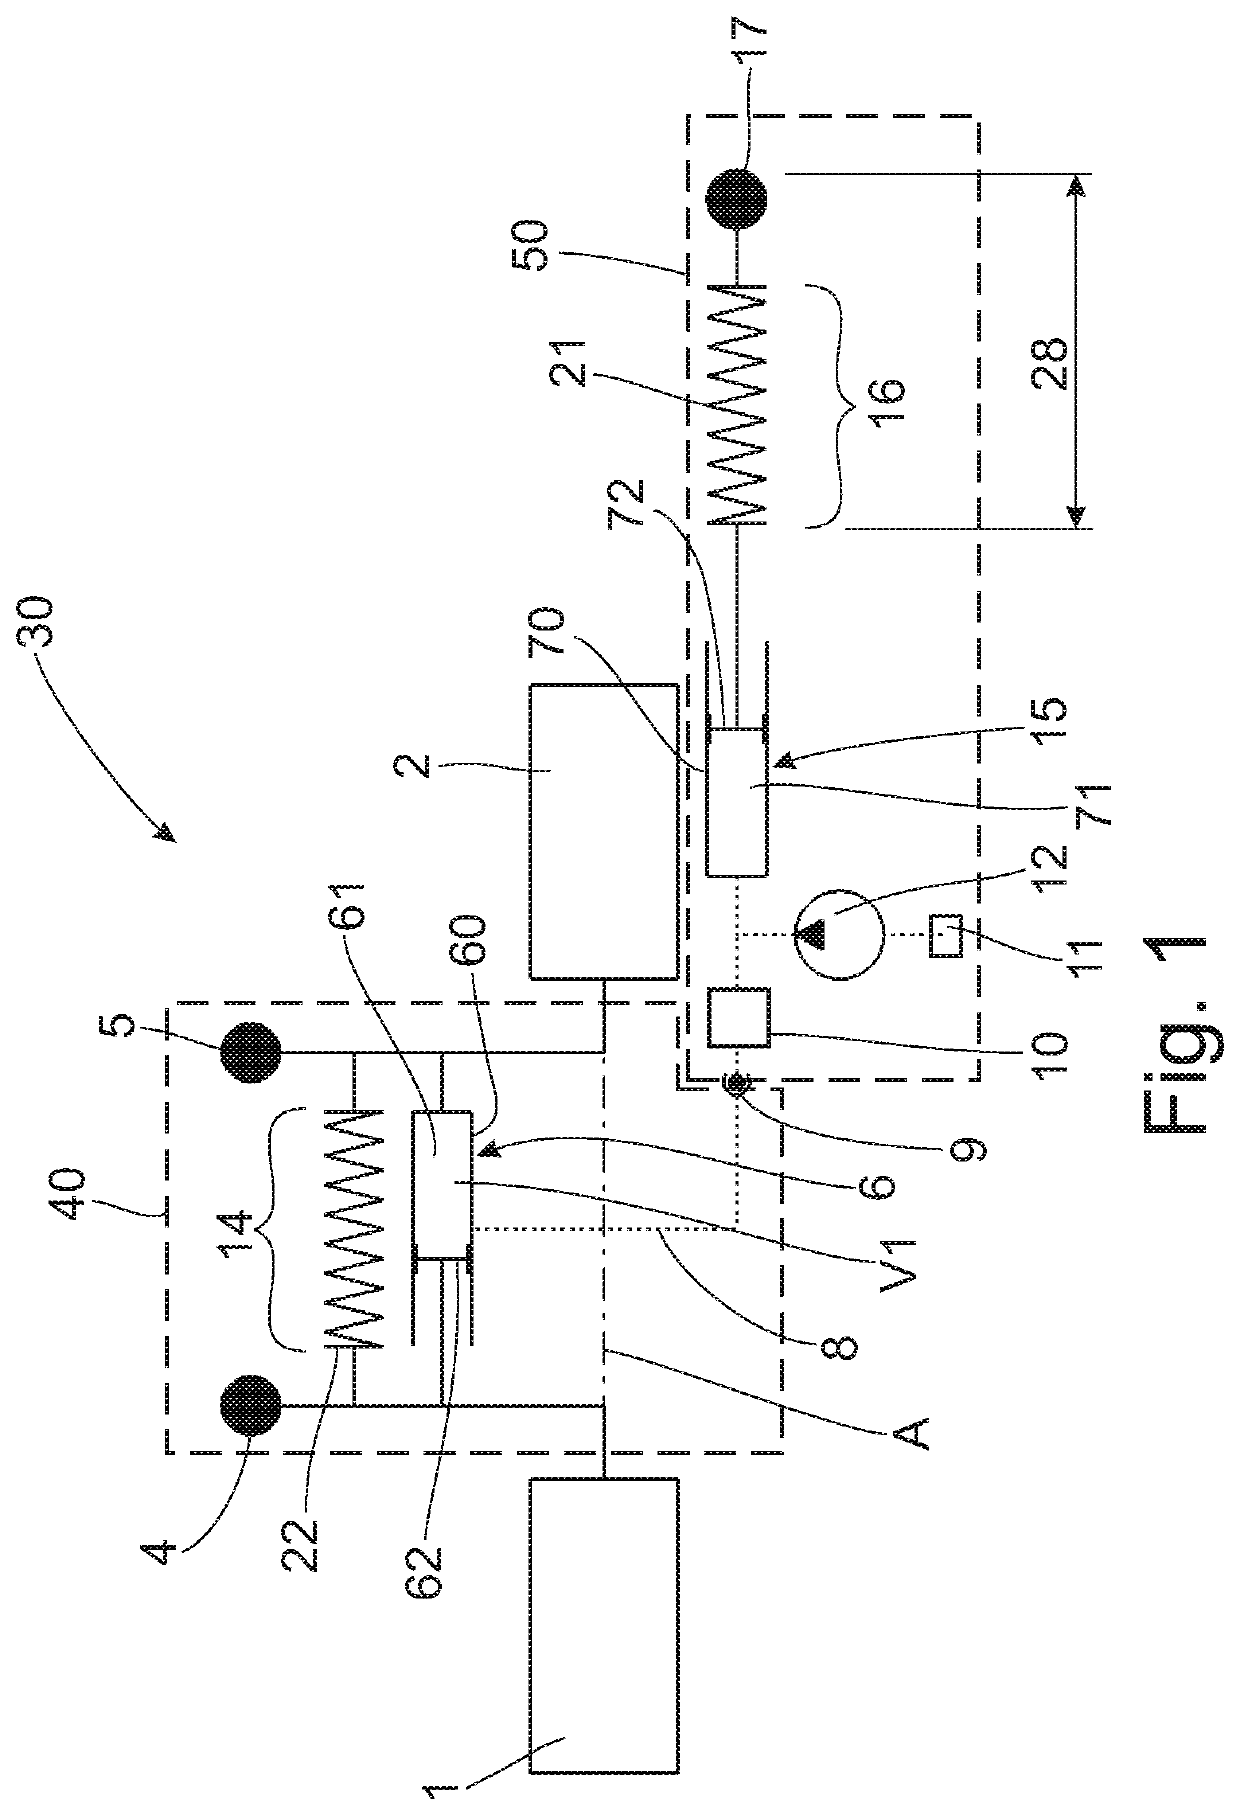 Torsional vibration damping assembly for a drive train of a vehicle